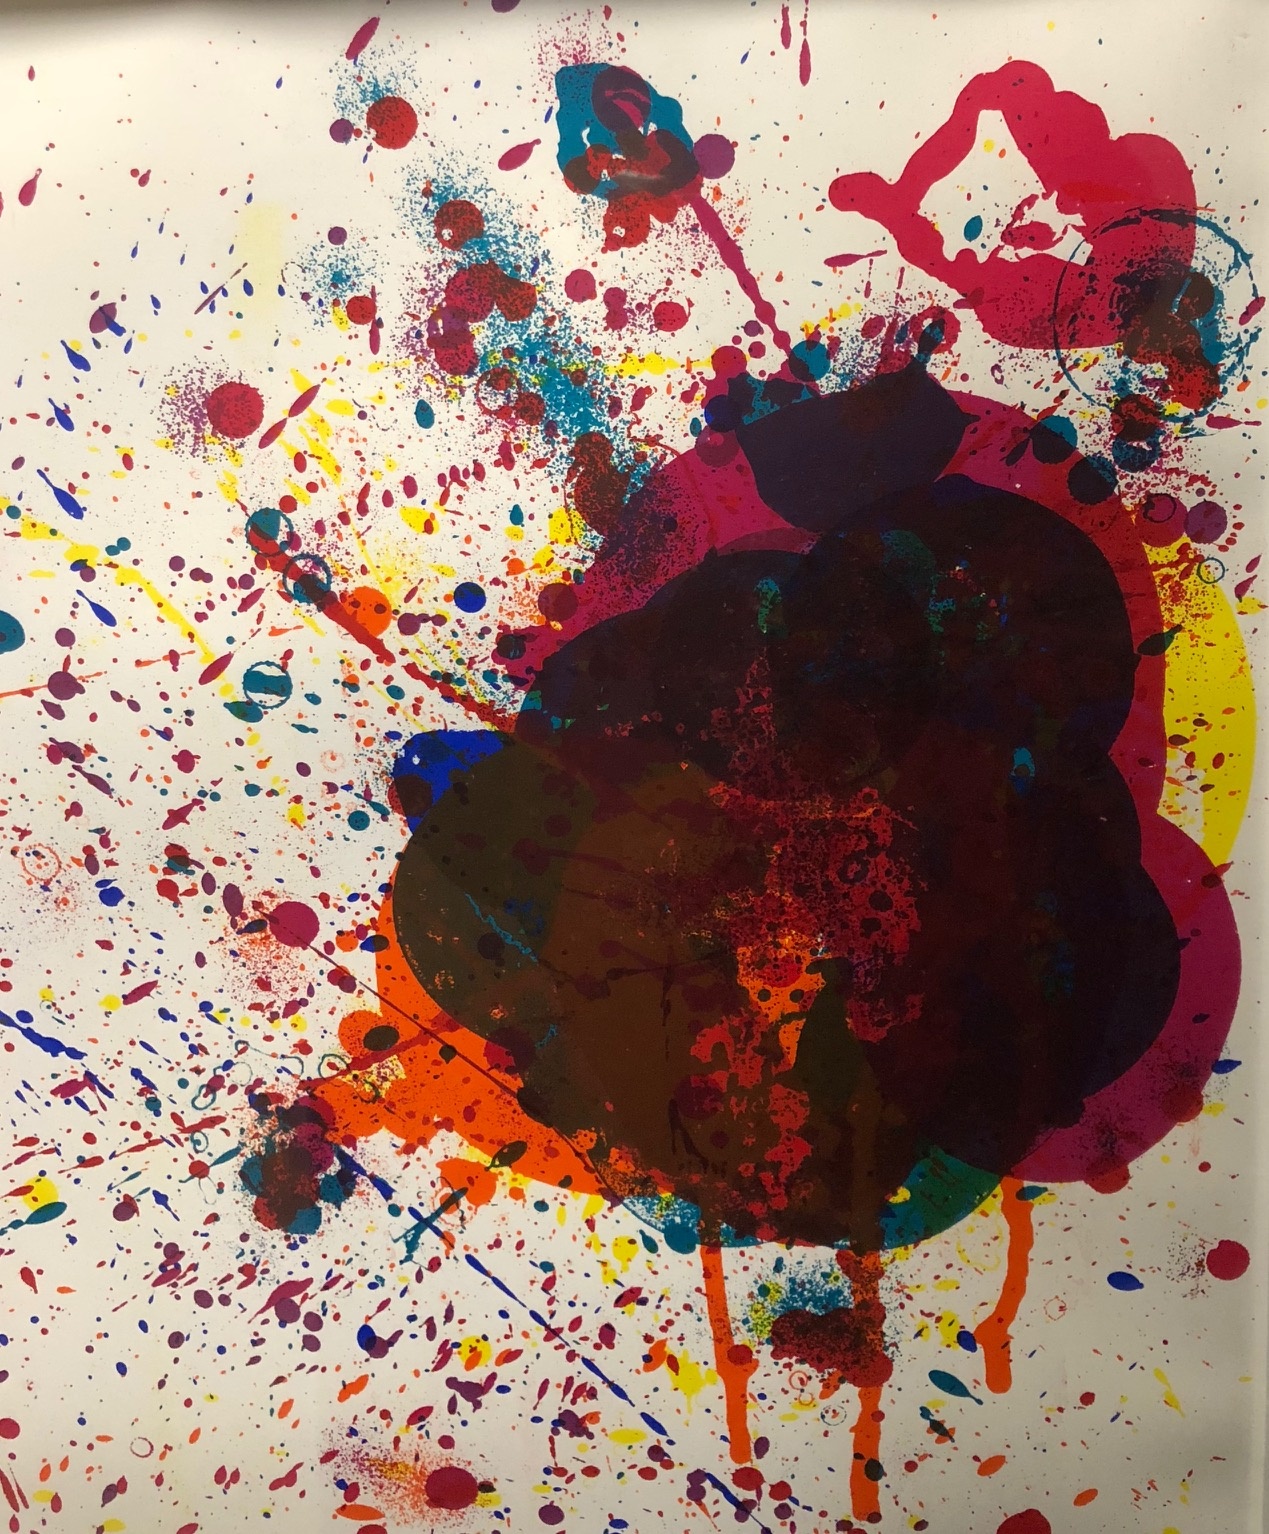 Sam Francis (1923 - 1994) "Lyre Eight" - 1972 - Image 2 of 8